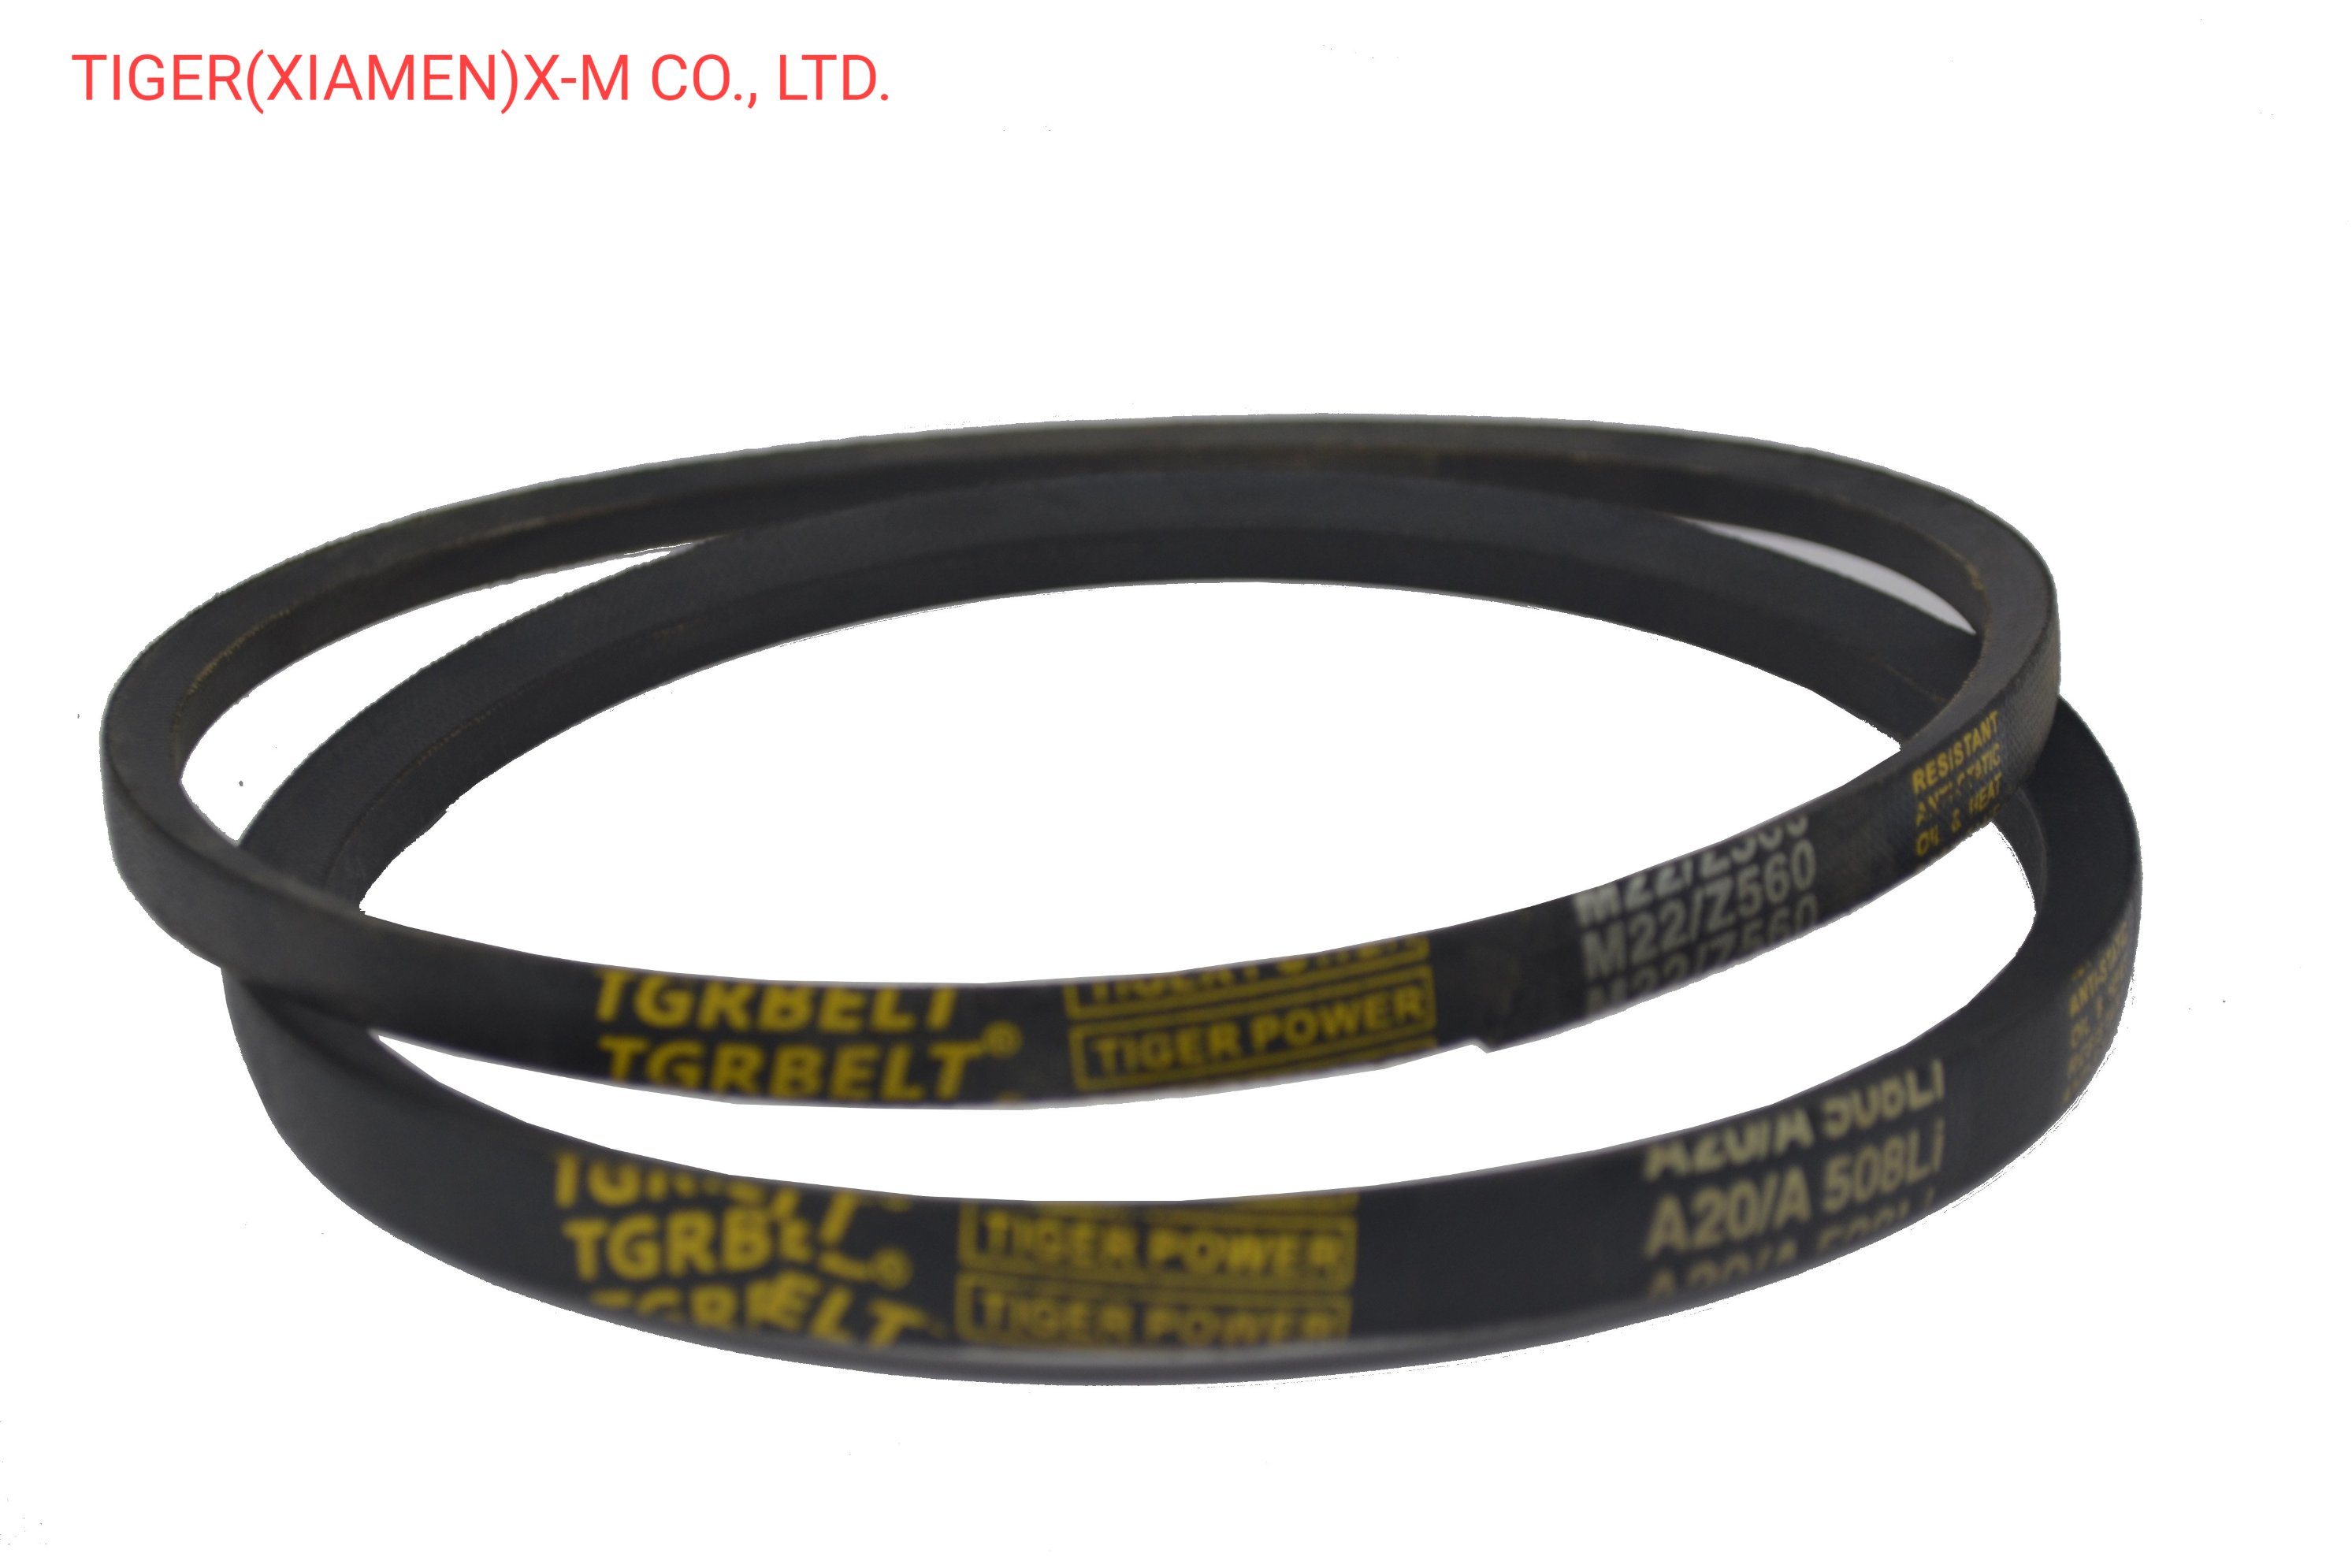 Highquality-Classical-Rubber-Vbelt-A20-From-Factory